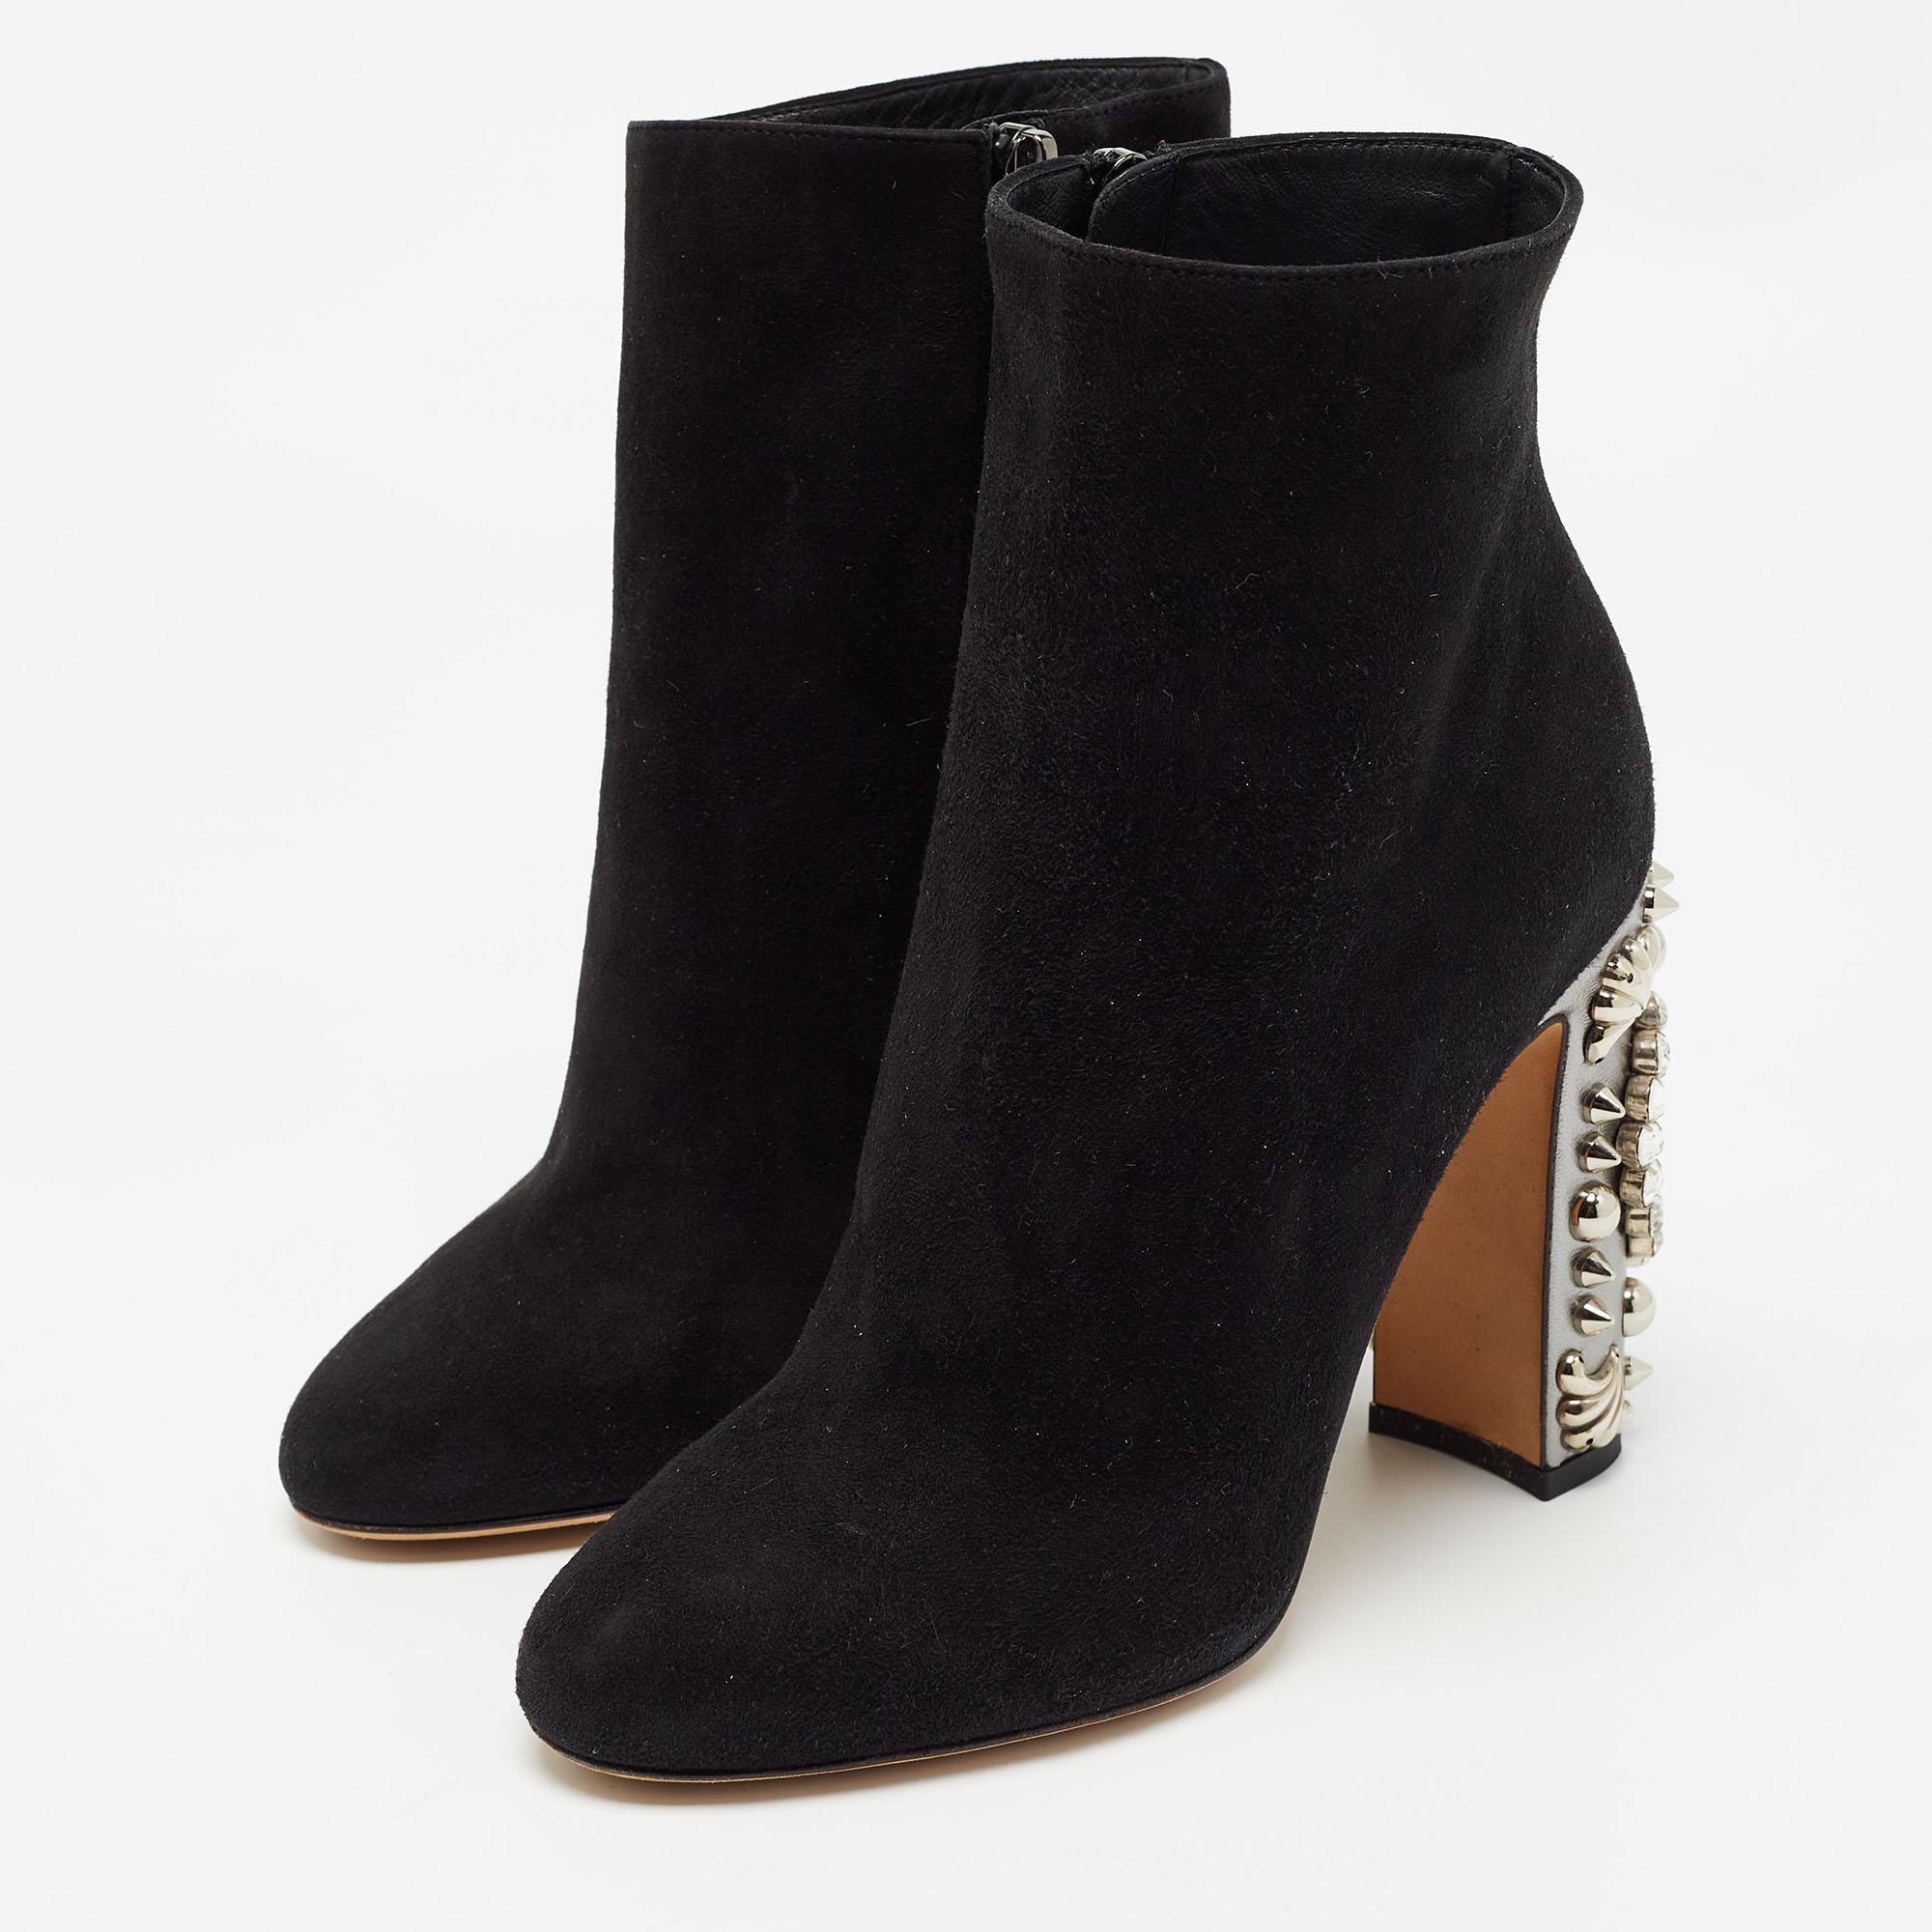 Designed by Dolce & Gabbana, these boots have the perfect fusion of class and comfort. They are created from suede with an gun metal-tone accents and the 11cm crystal-embellished heels will lend you confident steps.

